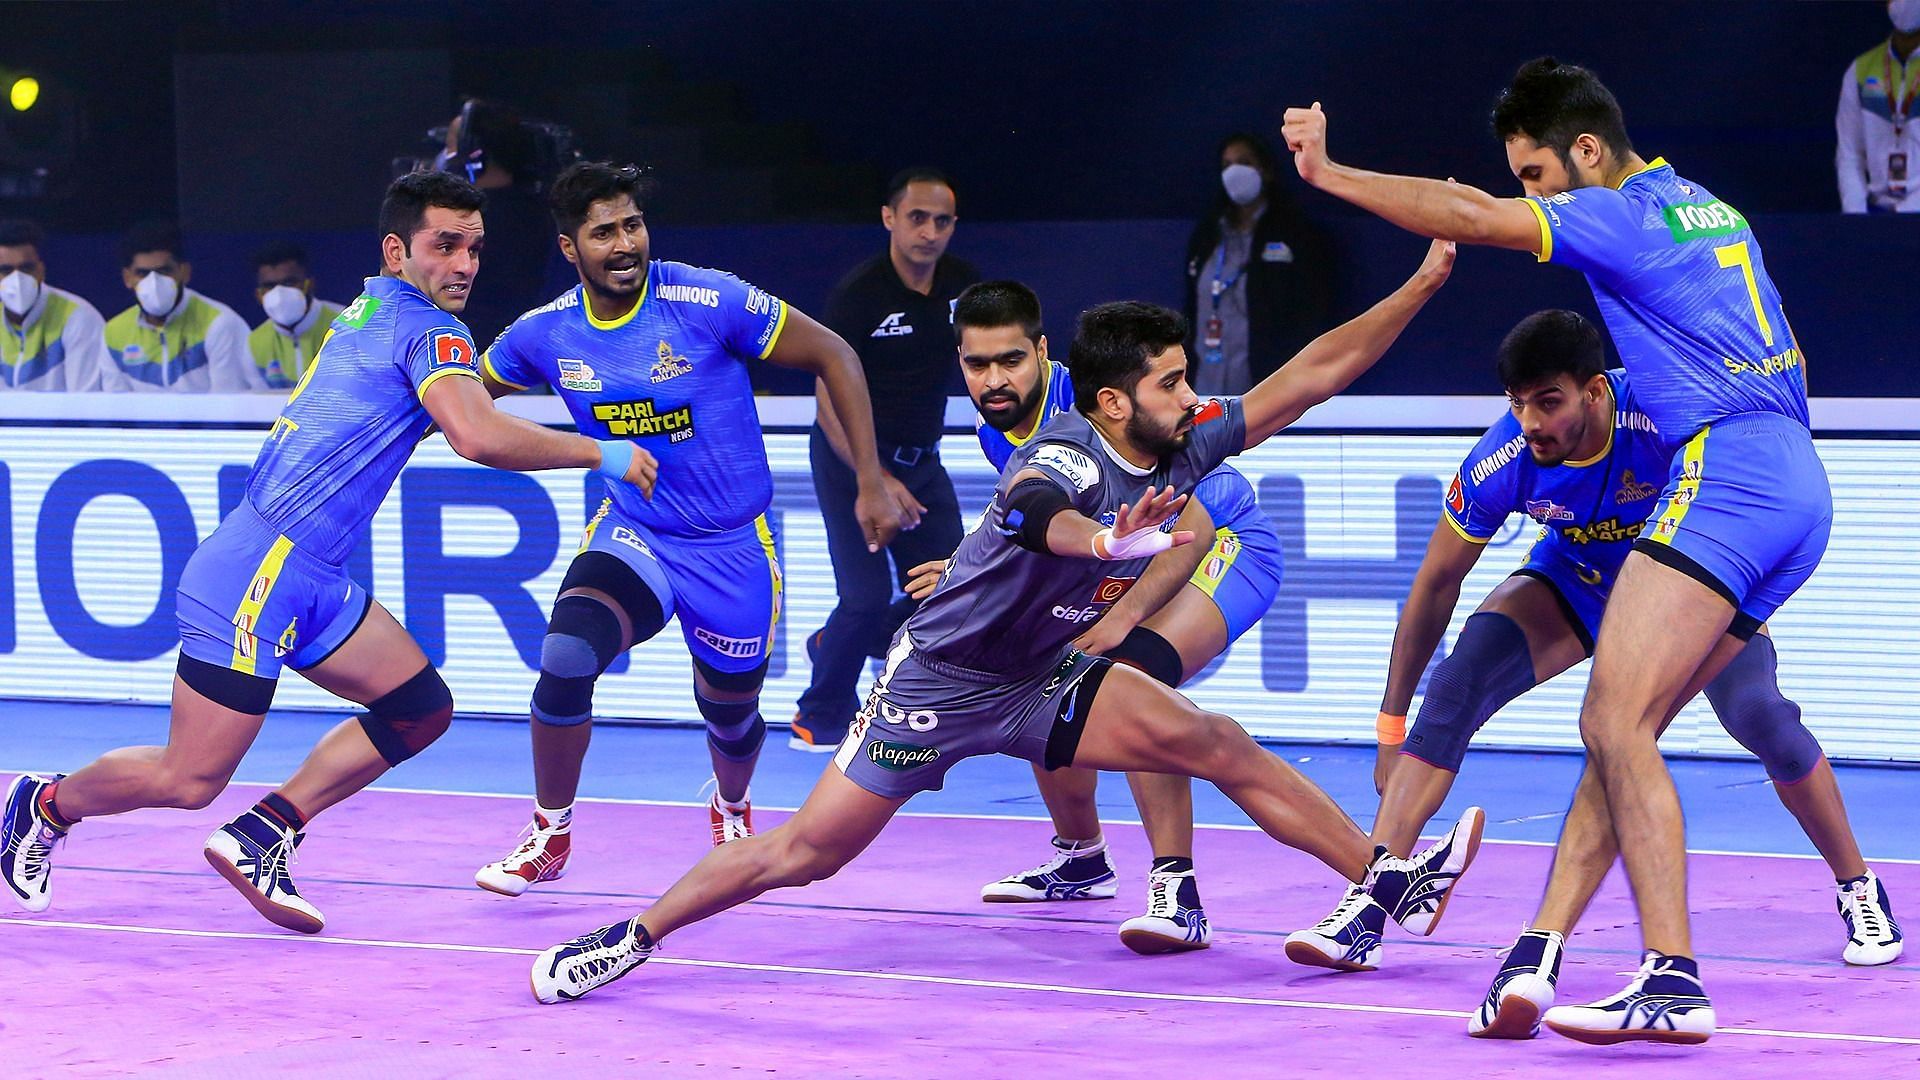 Tamil Thalaivas and Haryana Steelers were in action during the first match on January 10, 2022 (Image: Pro Kabadi/Facebook)